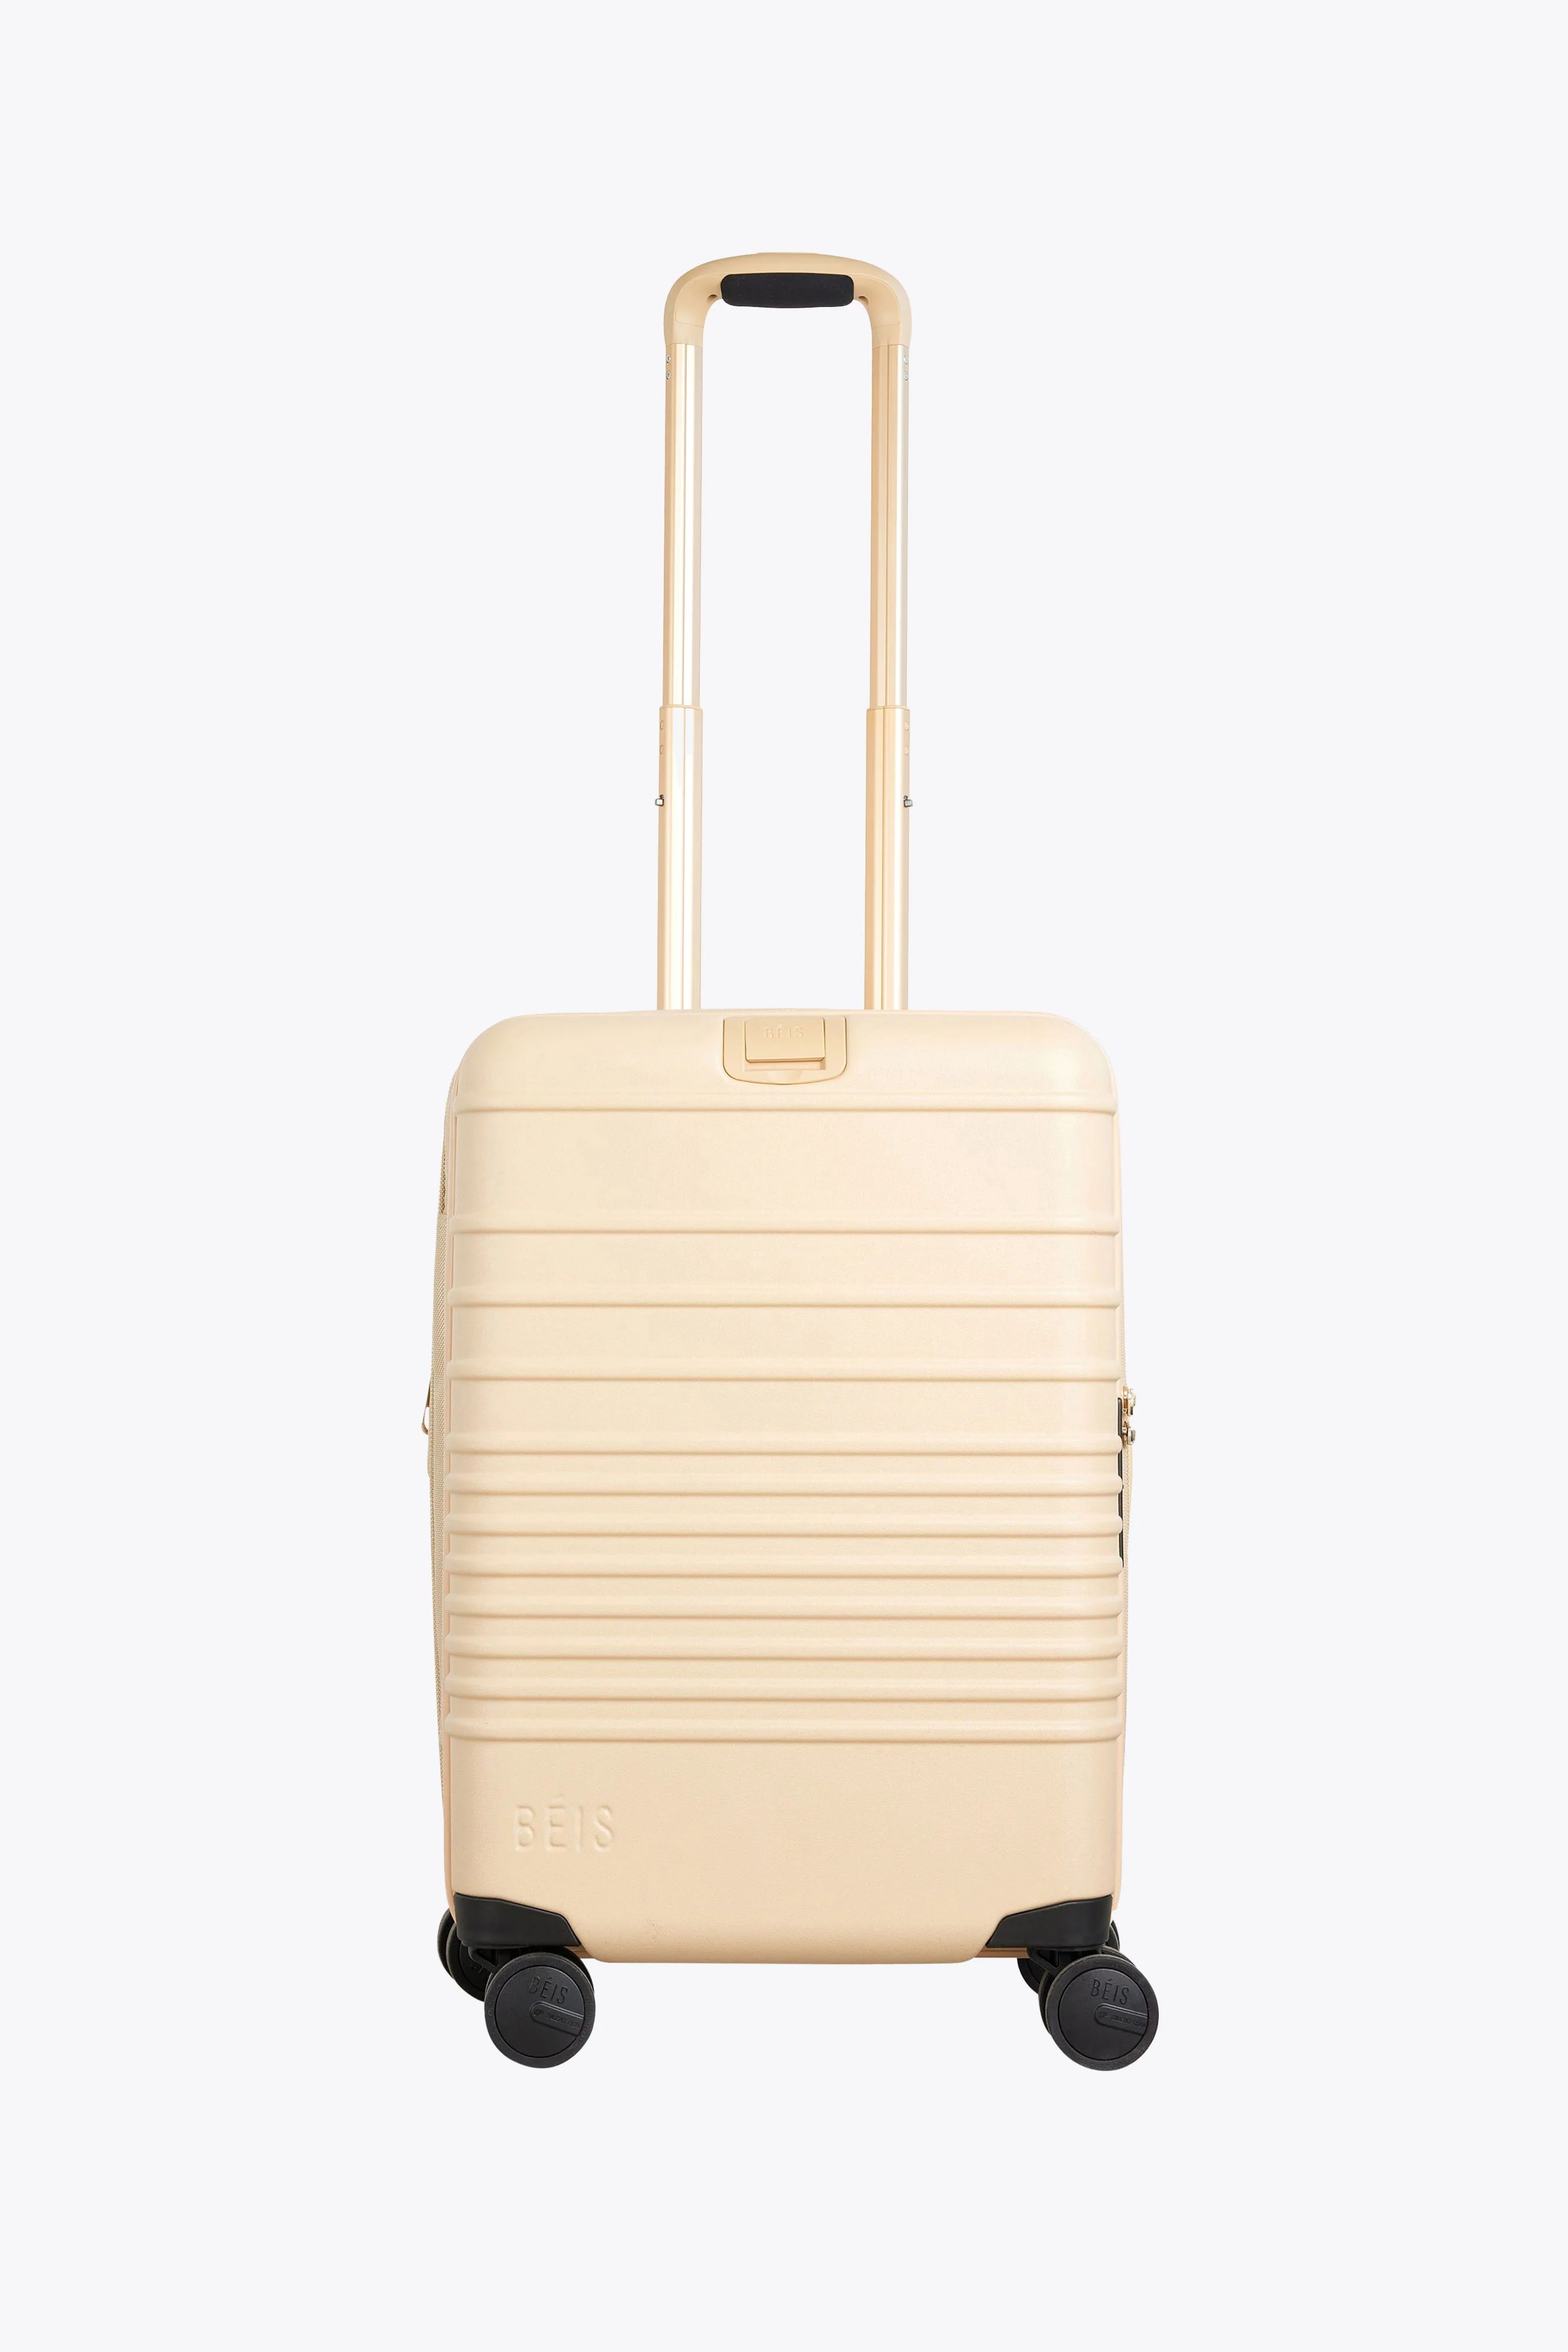 BÉIS 'The Carry-On Roller' in Beige - 21" Carry On Rolling Luggage | BÉIS Travel